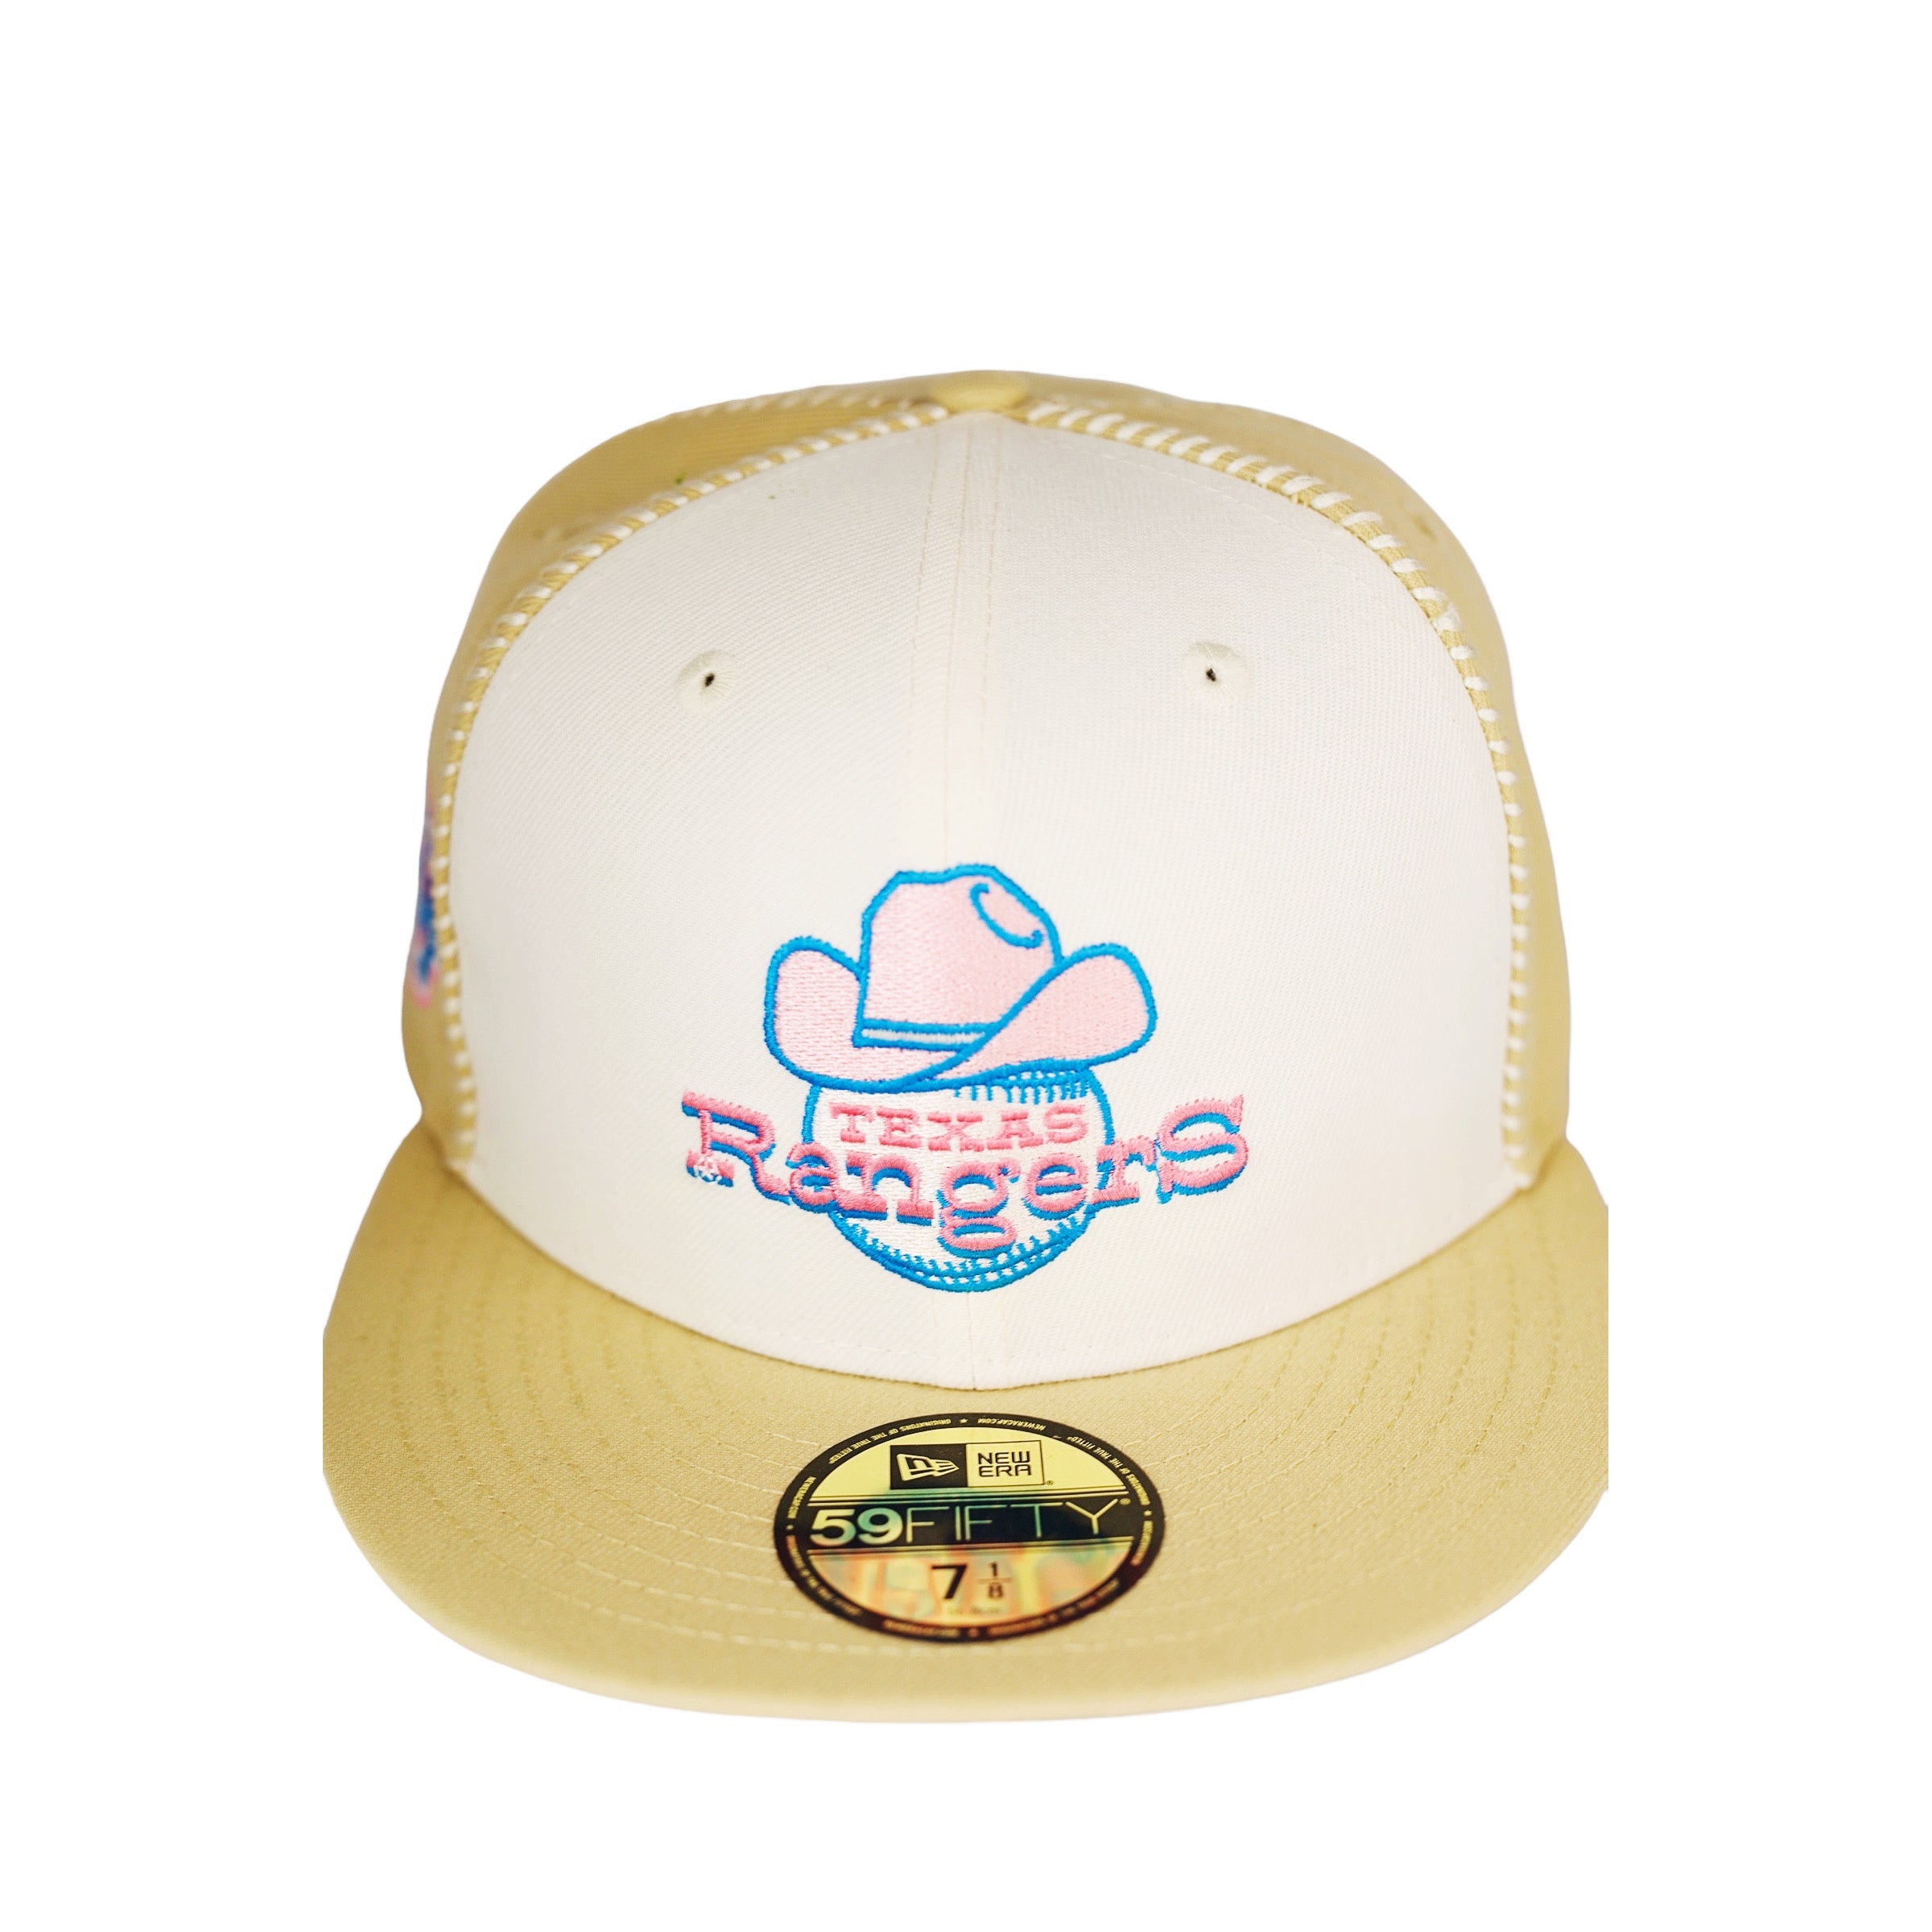 Texas Rangers Seam Stitched Fitted Cap